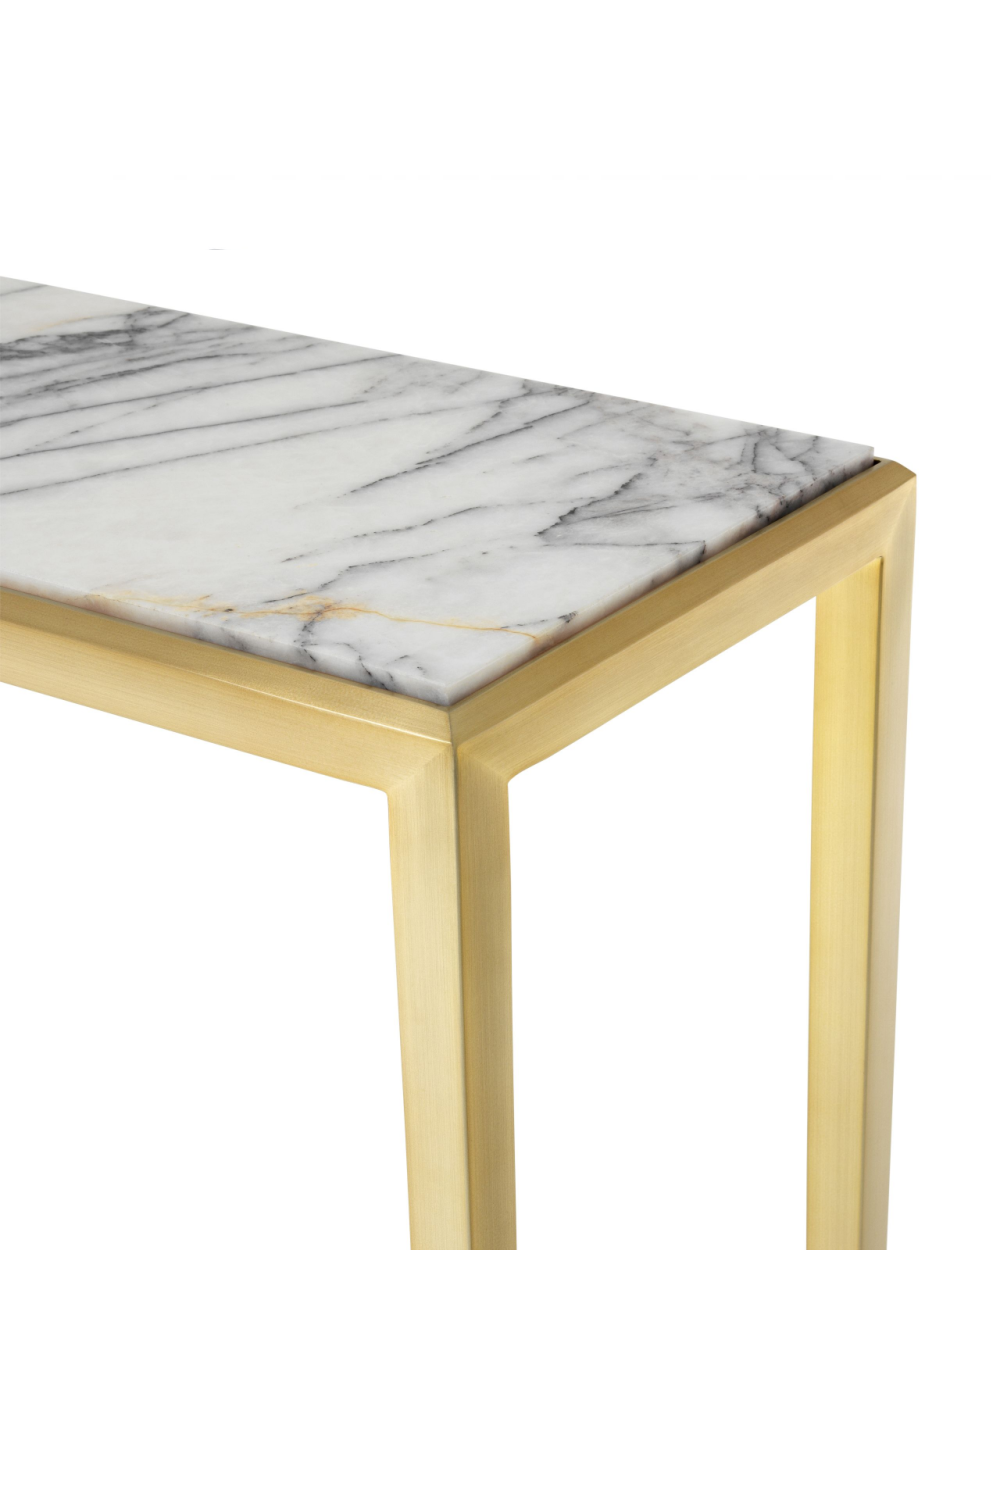 Small Gold Console Table | Eichholtz Henley S | OROA